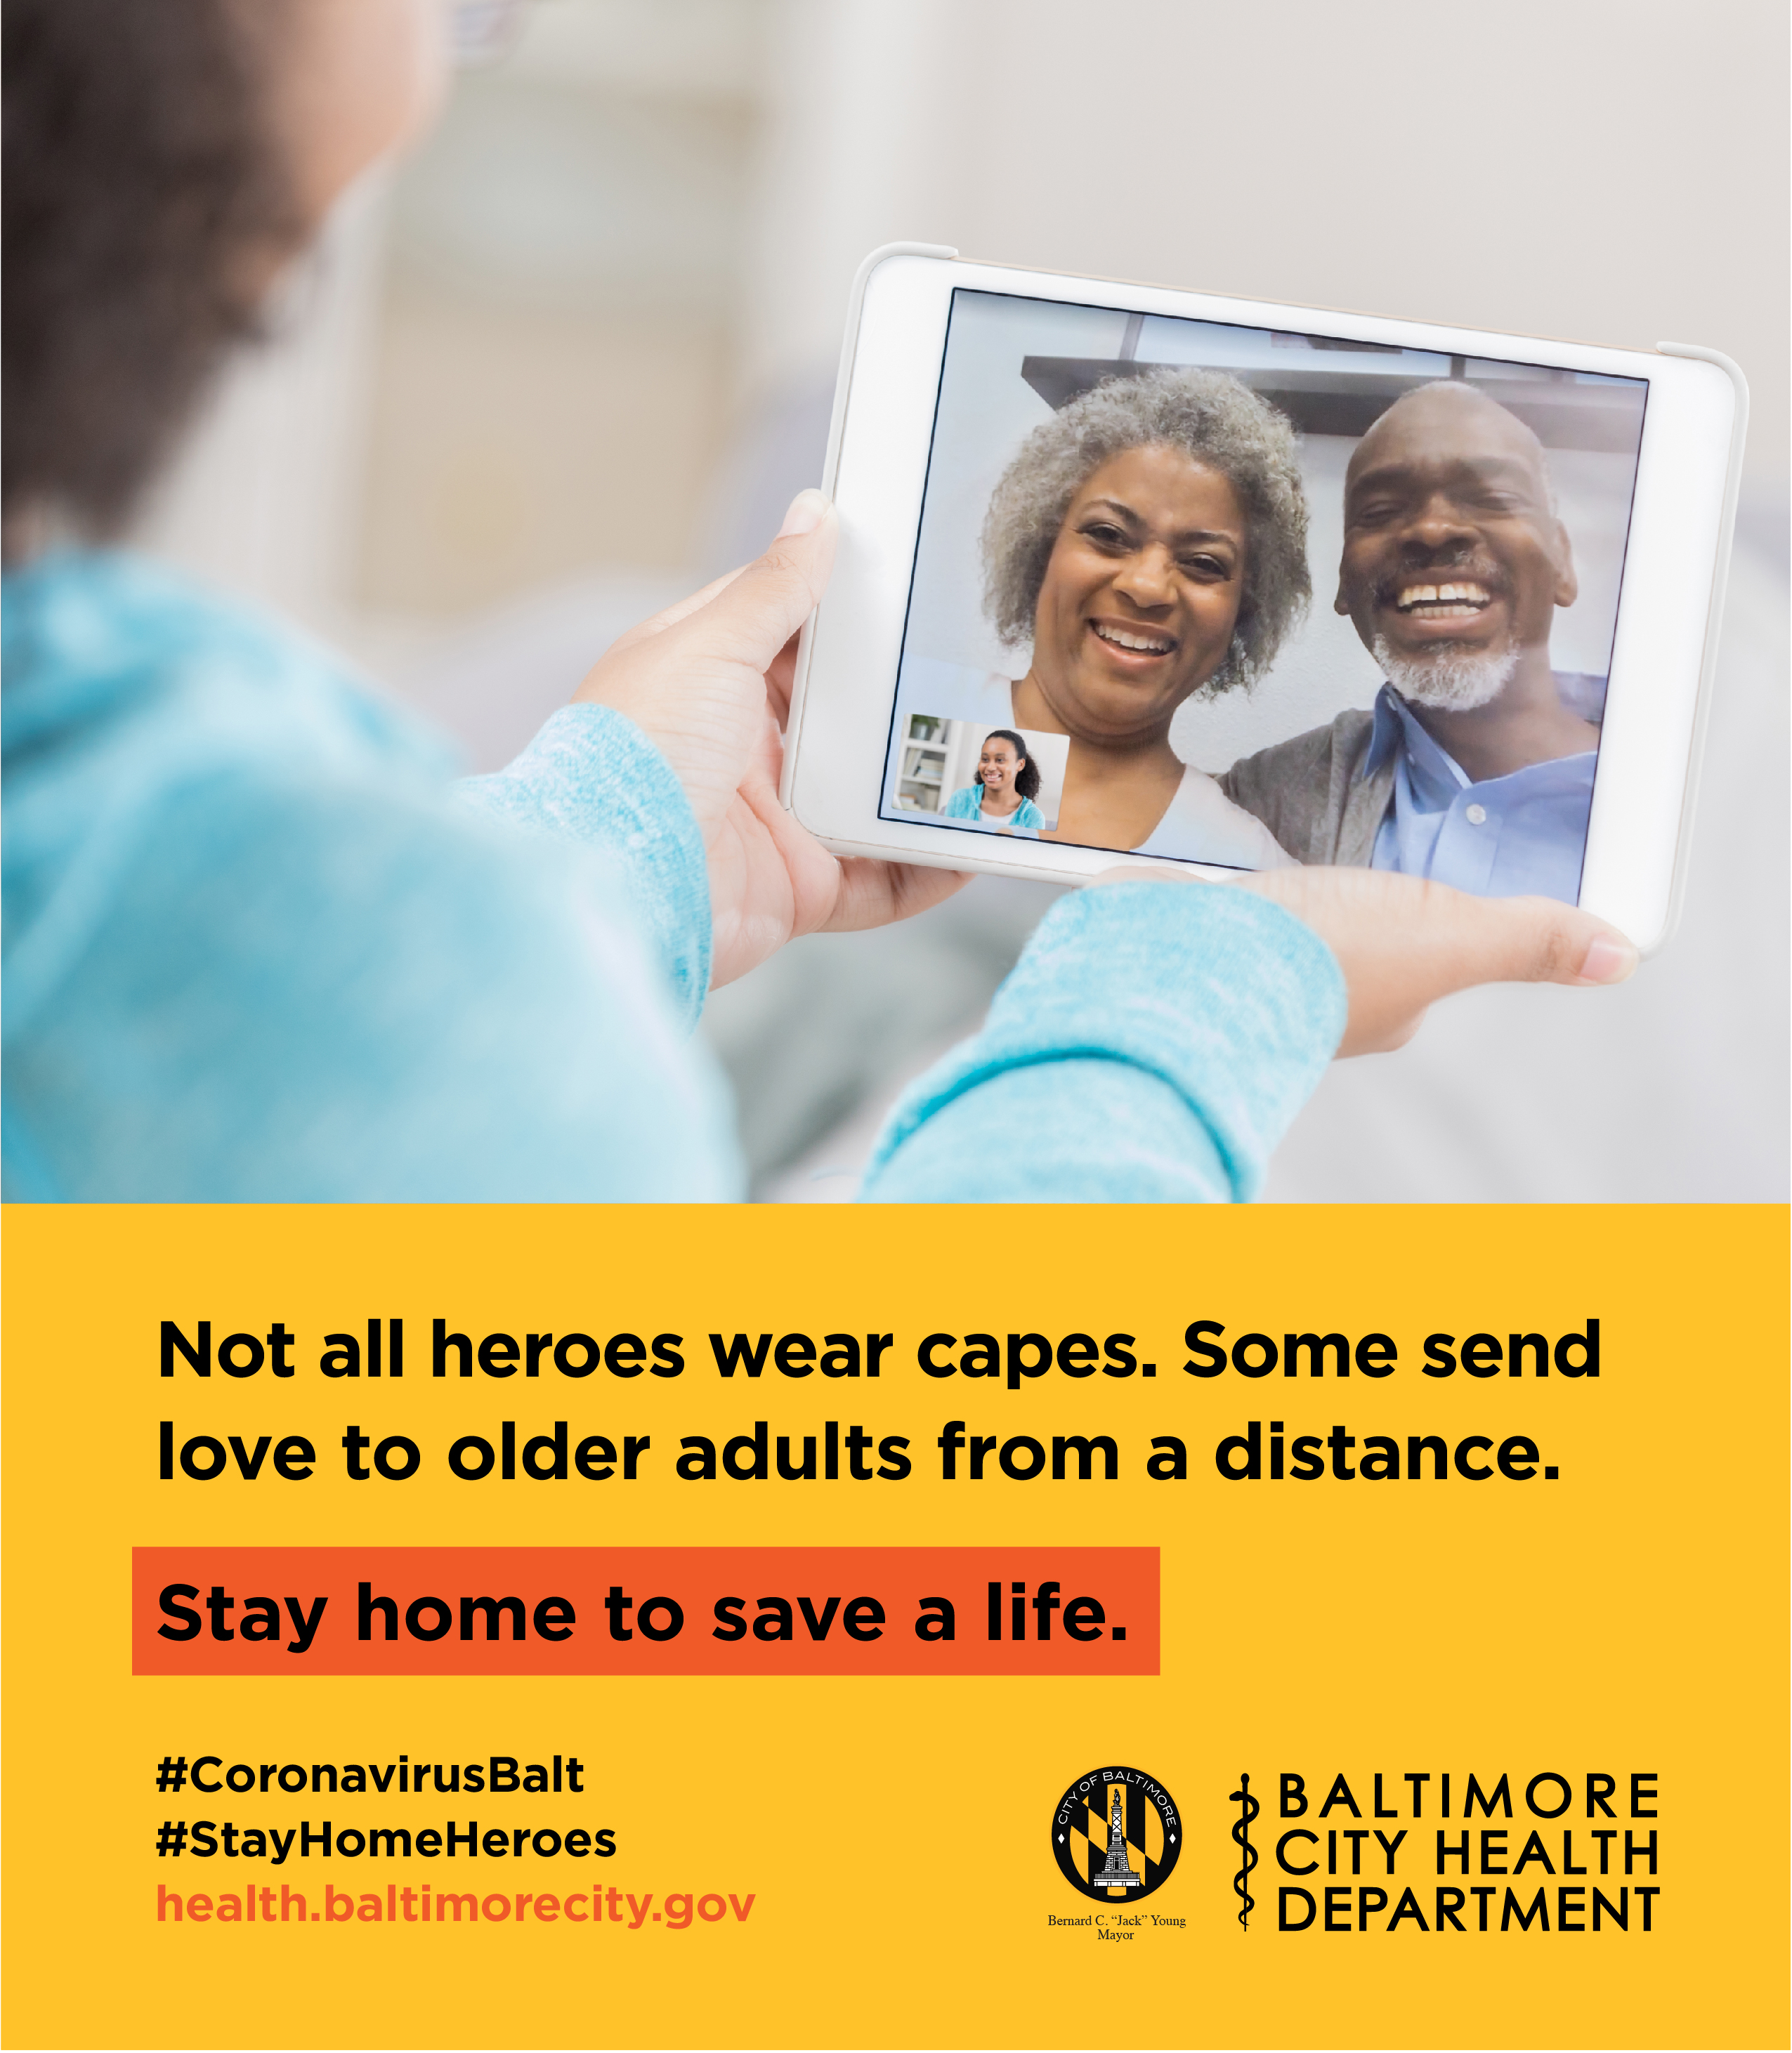 Not all heroes wear capes. Some send love to older adults from a distance. Stay home to save a life.